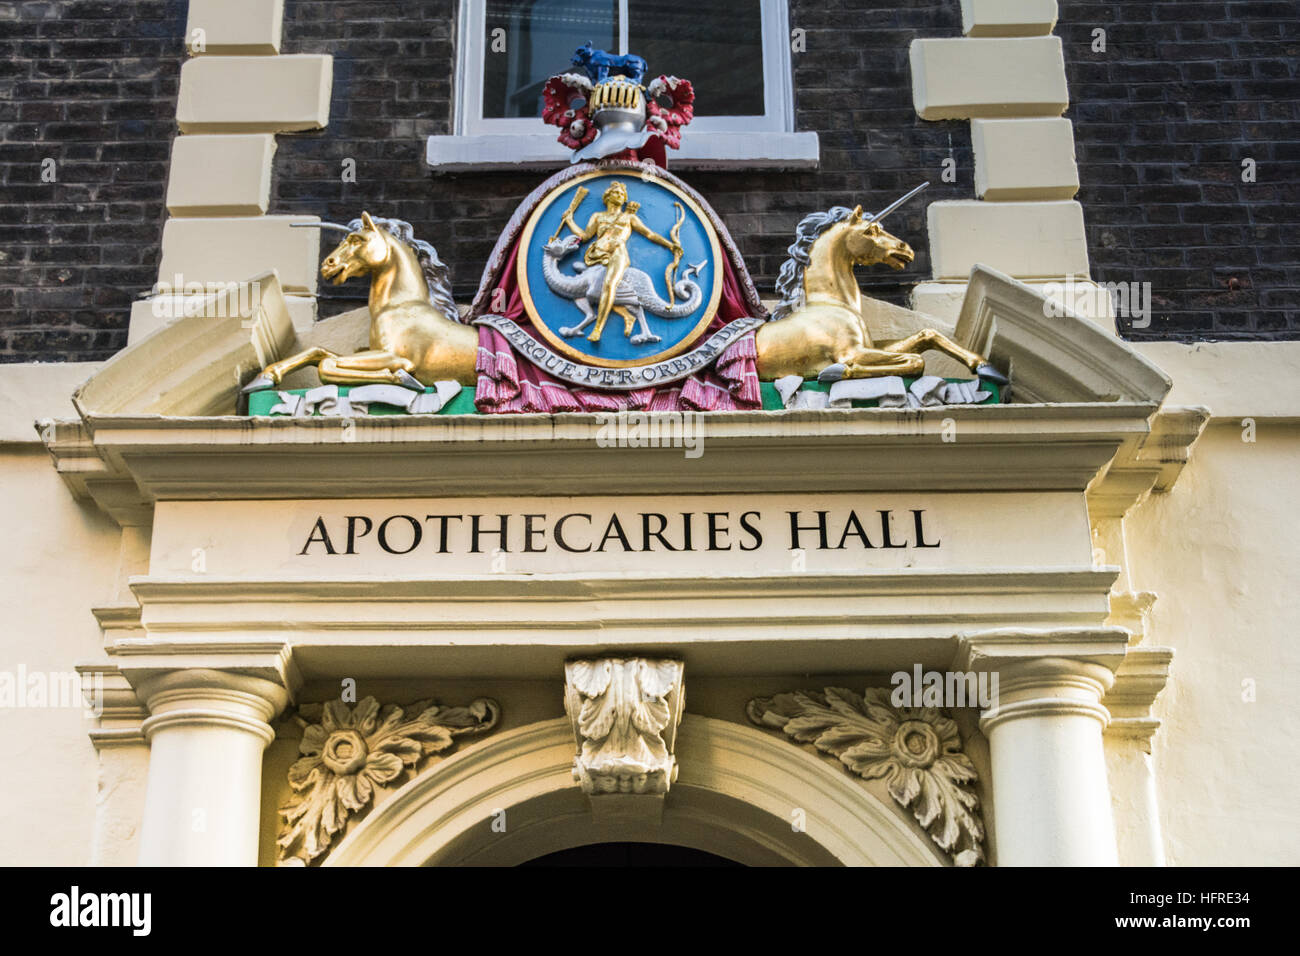 Coat of arms outside Apothecaries Hall, home to The Worshipful Society of Apothecaries, Black Friars Lane, London, EC4, England, U.K. Stock Photo